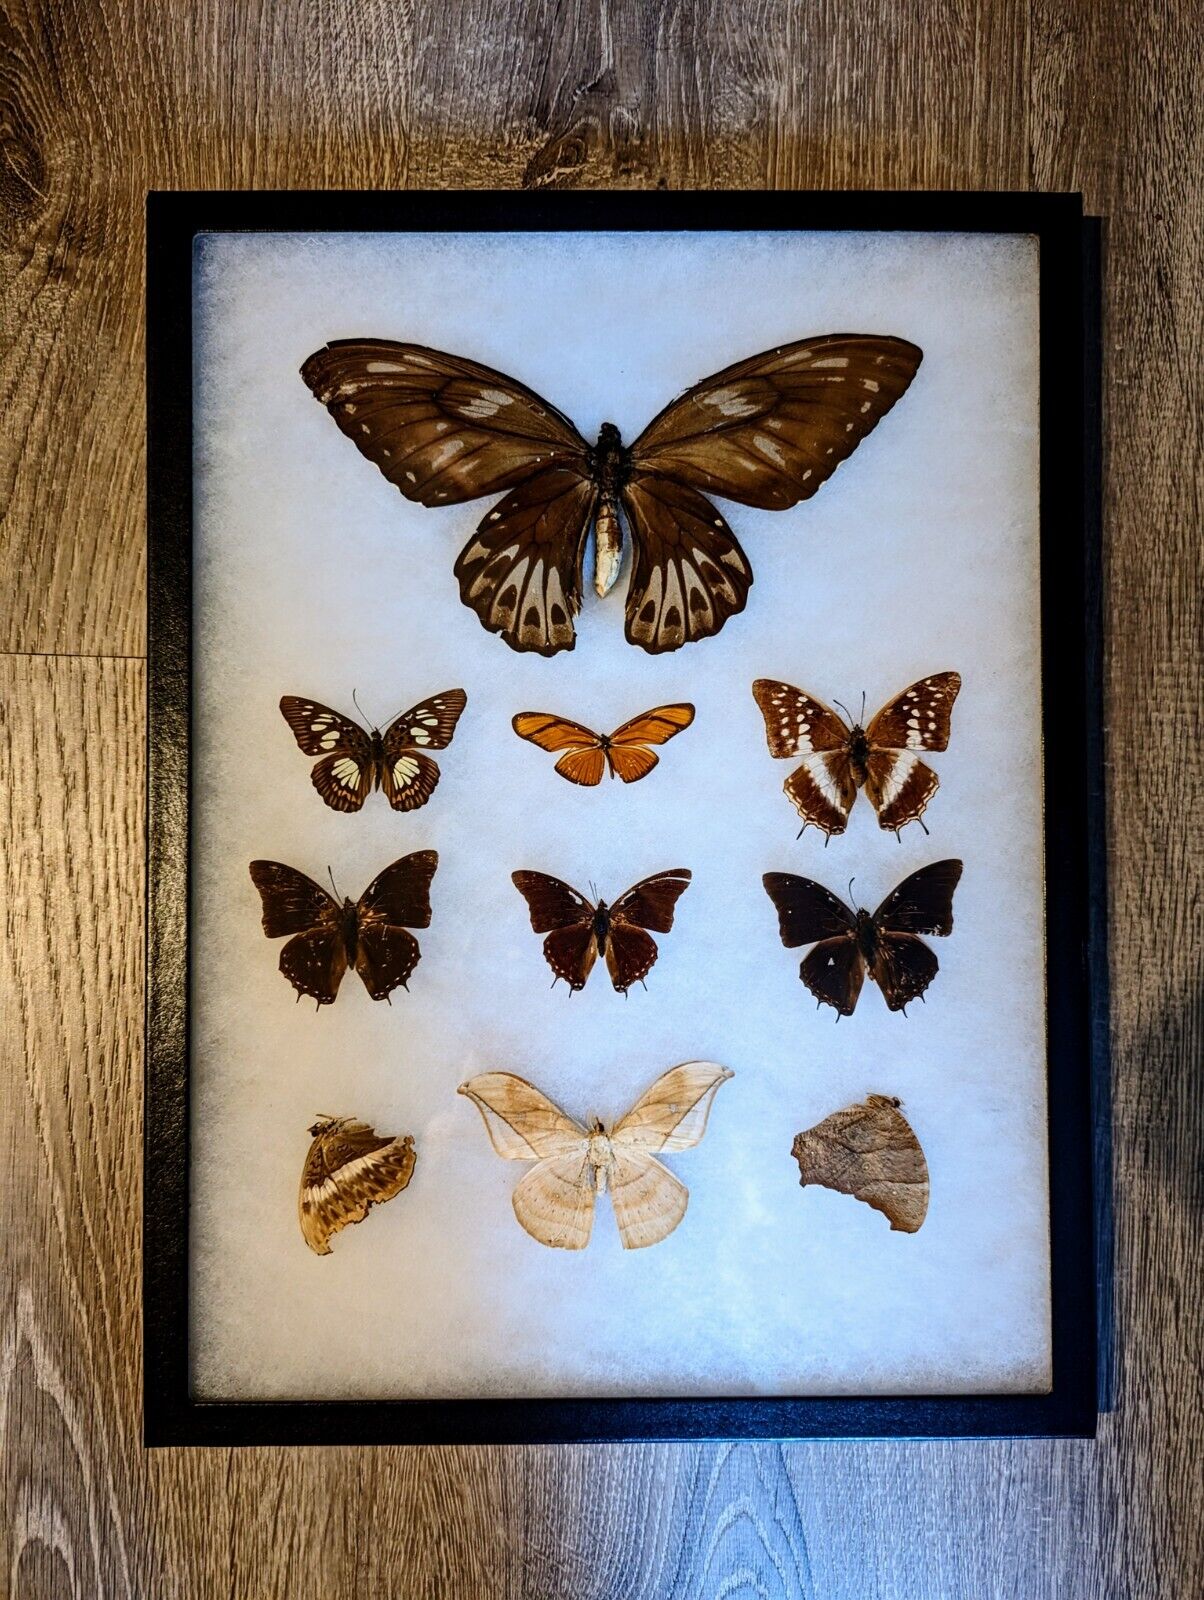 Antique Taxidermy Butterfly Mount Decor BM#22. Butterfly/Moths from around world